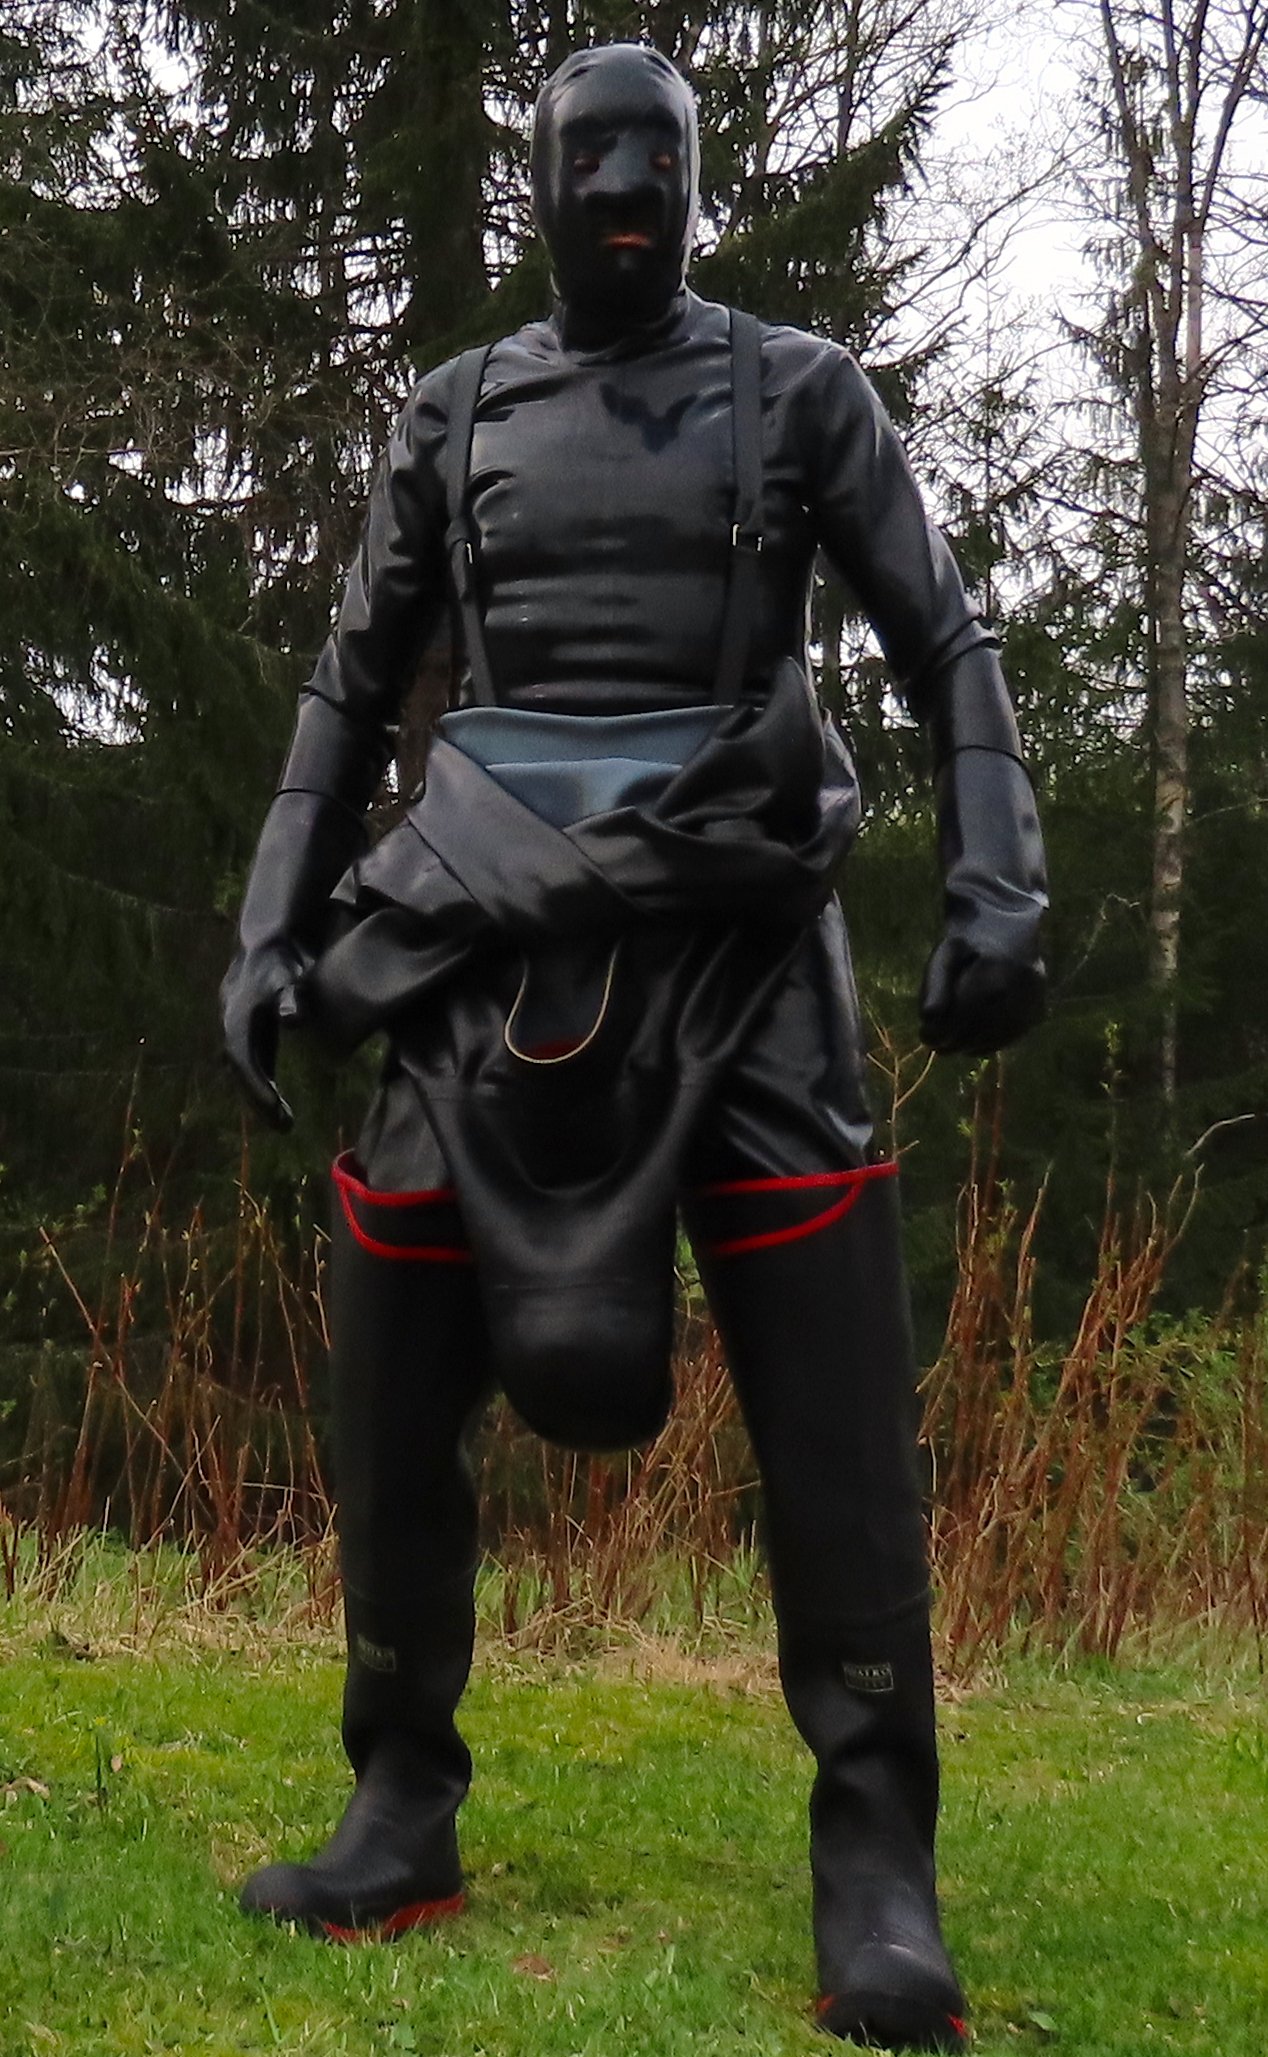 Durven Inconsistent Diplomaat camo78fs on Twitter: "Heavy rubber drysuit and latexsuit under it...feeling  is nice,slippery and rubberized. https://t.co/w130wIvIzu" / Twitter